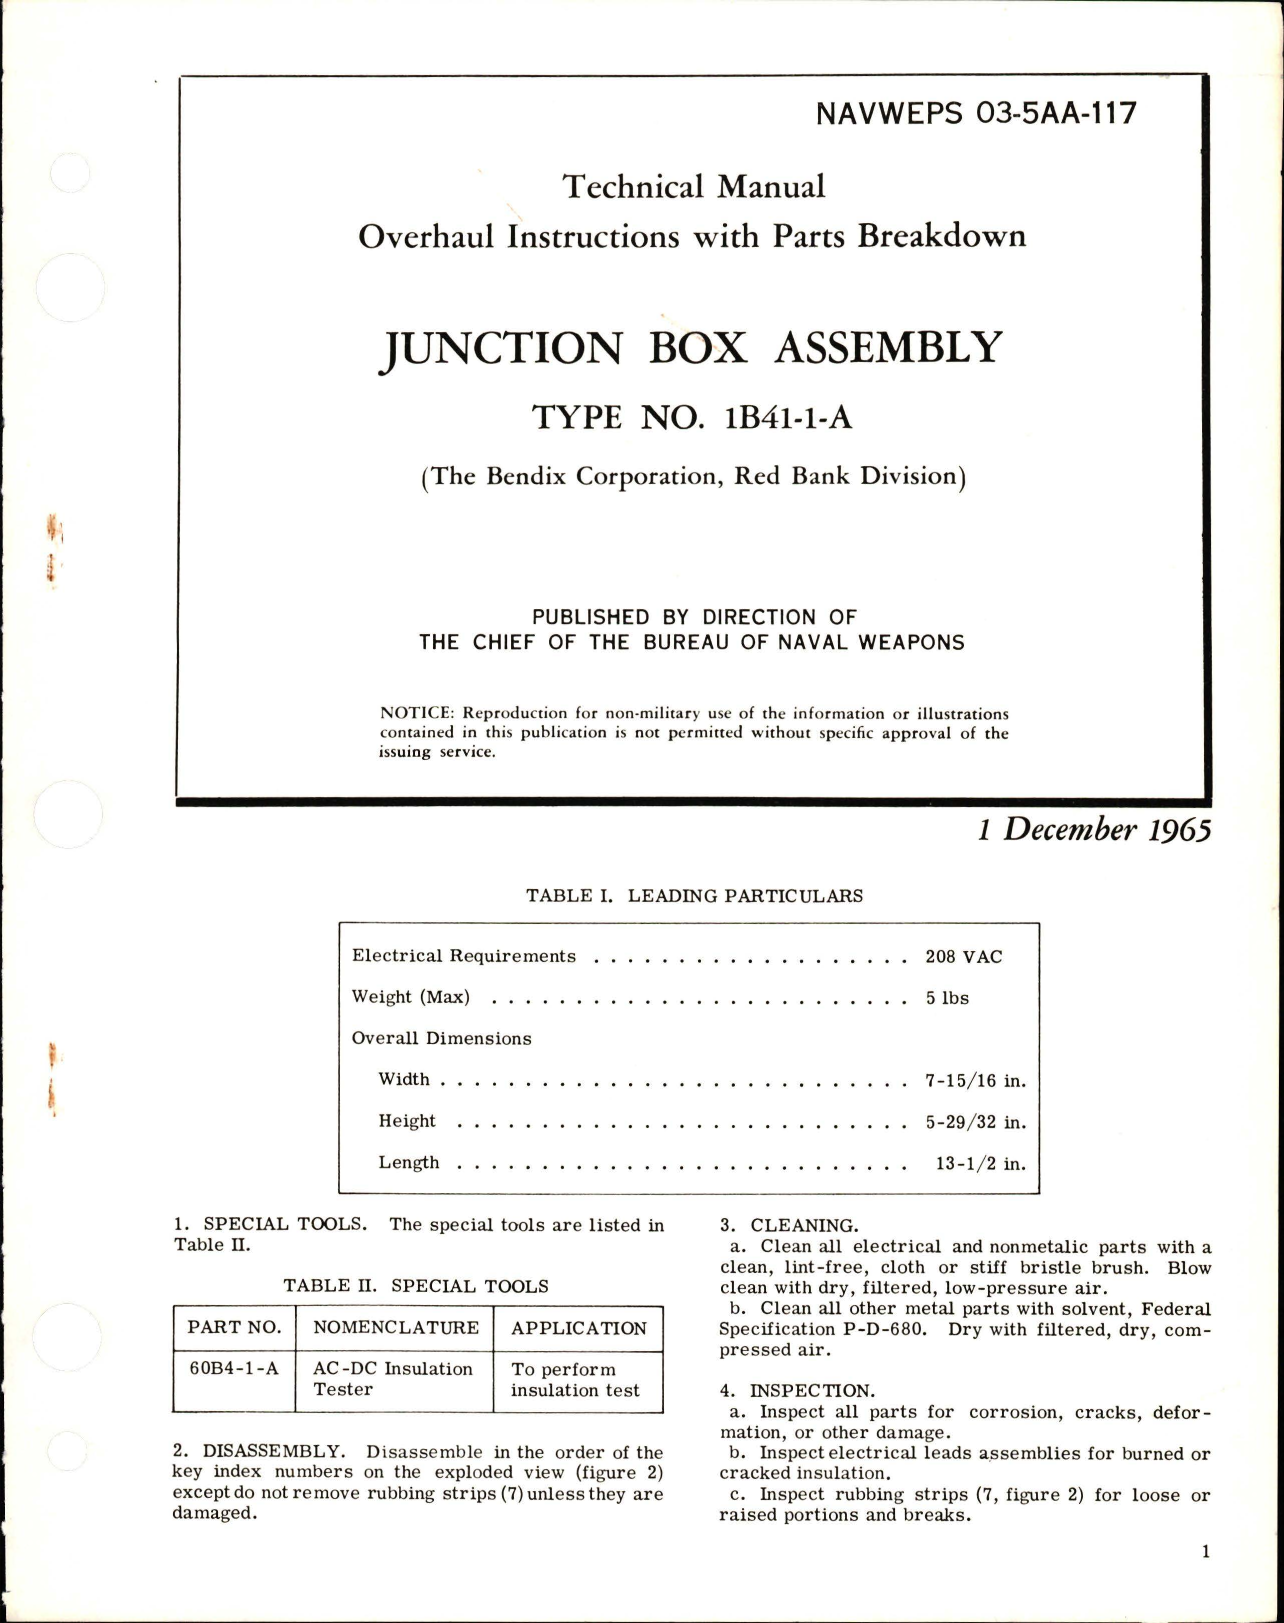 Sample page 1 from AirCorps Library document: Overhaul Instructions with Parts Breakdown for Junction Box Assembly - Type 1B41-1-A